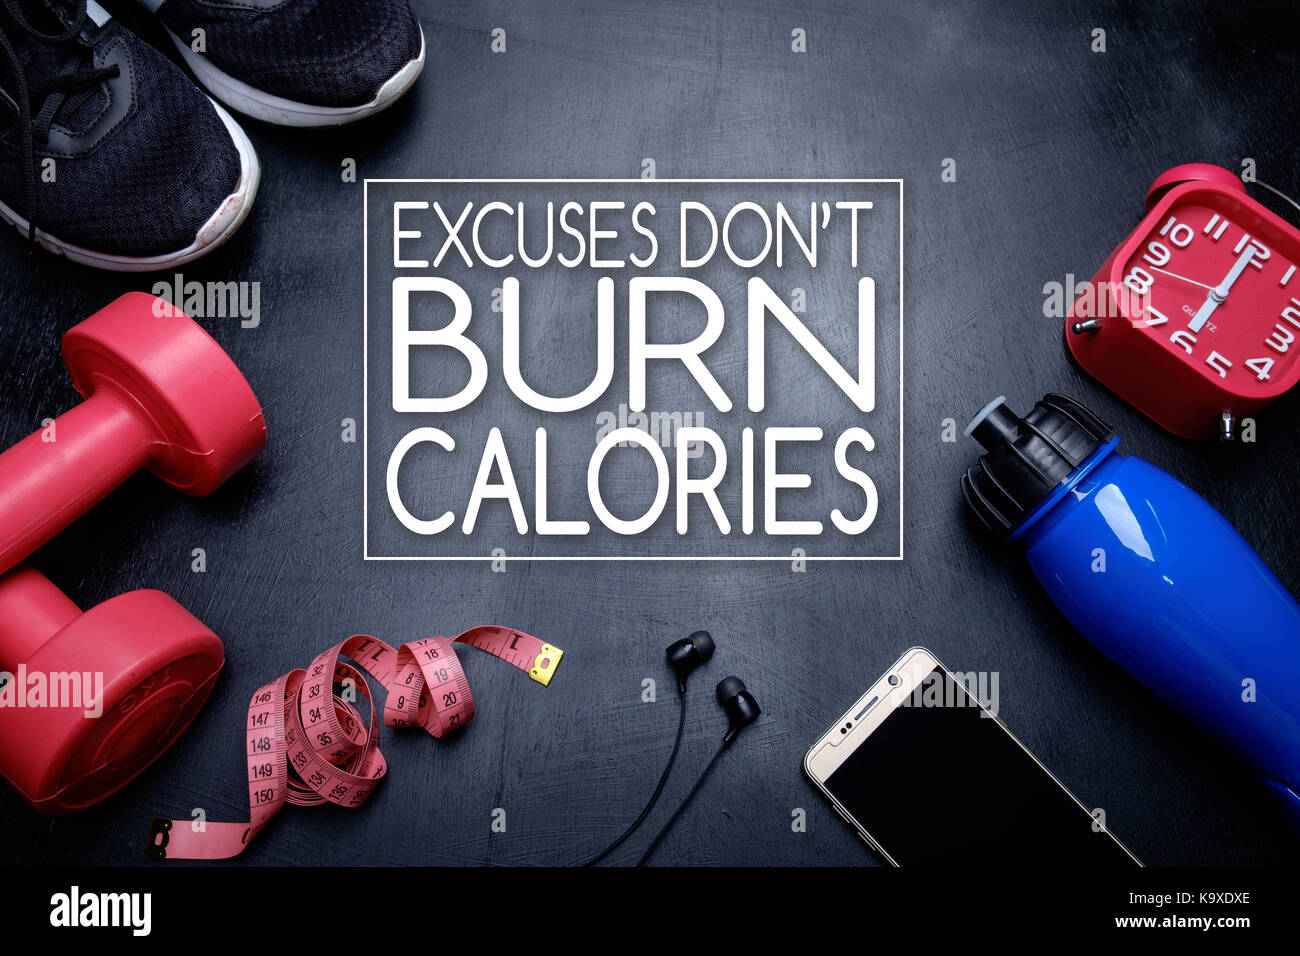 Excuses Don't Burn Calories. Fitness motivational quotes. Stock Photo